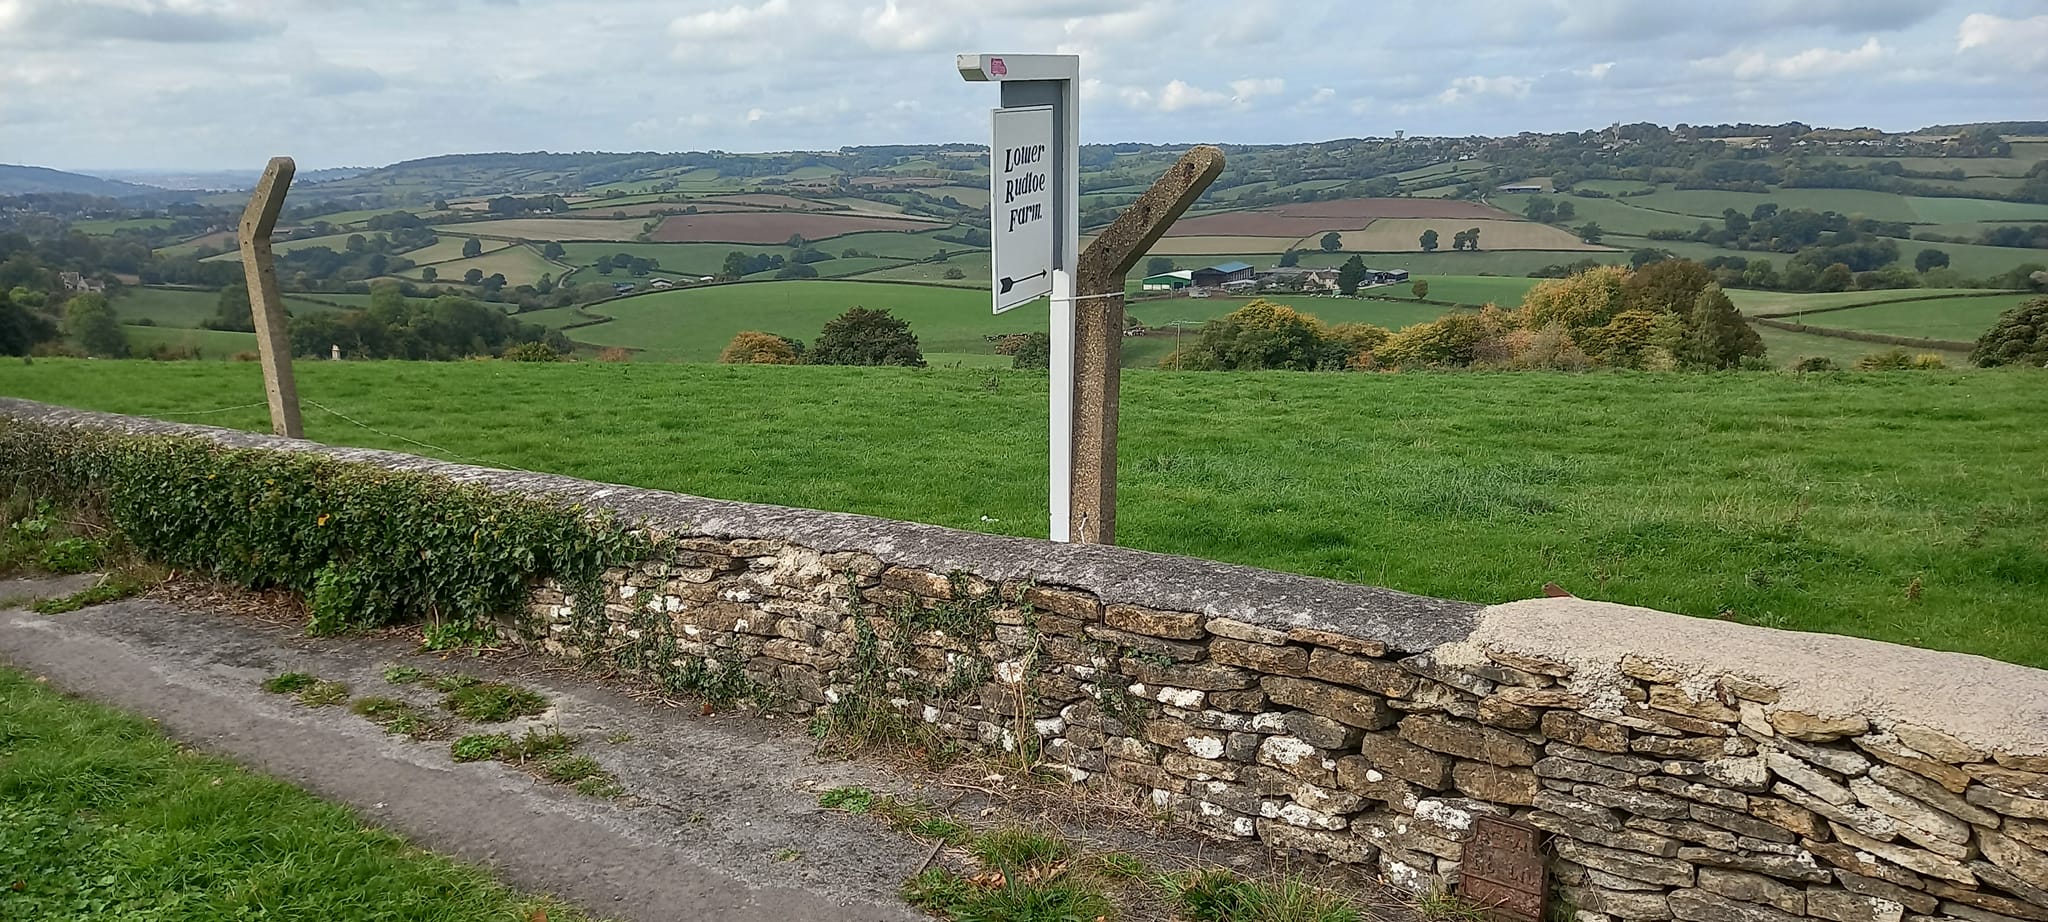 Telegraph cable marker post at Jnc. Box Hill, Bath Road and lane to Lower Ruddle Farm, Box Hill, Corsham by Spike Johnson 